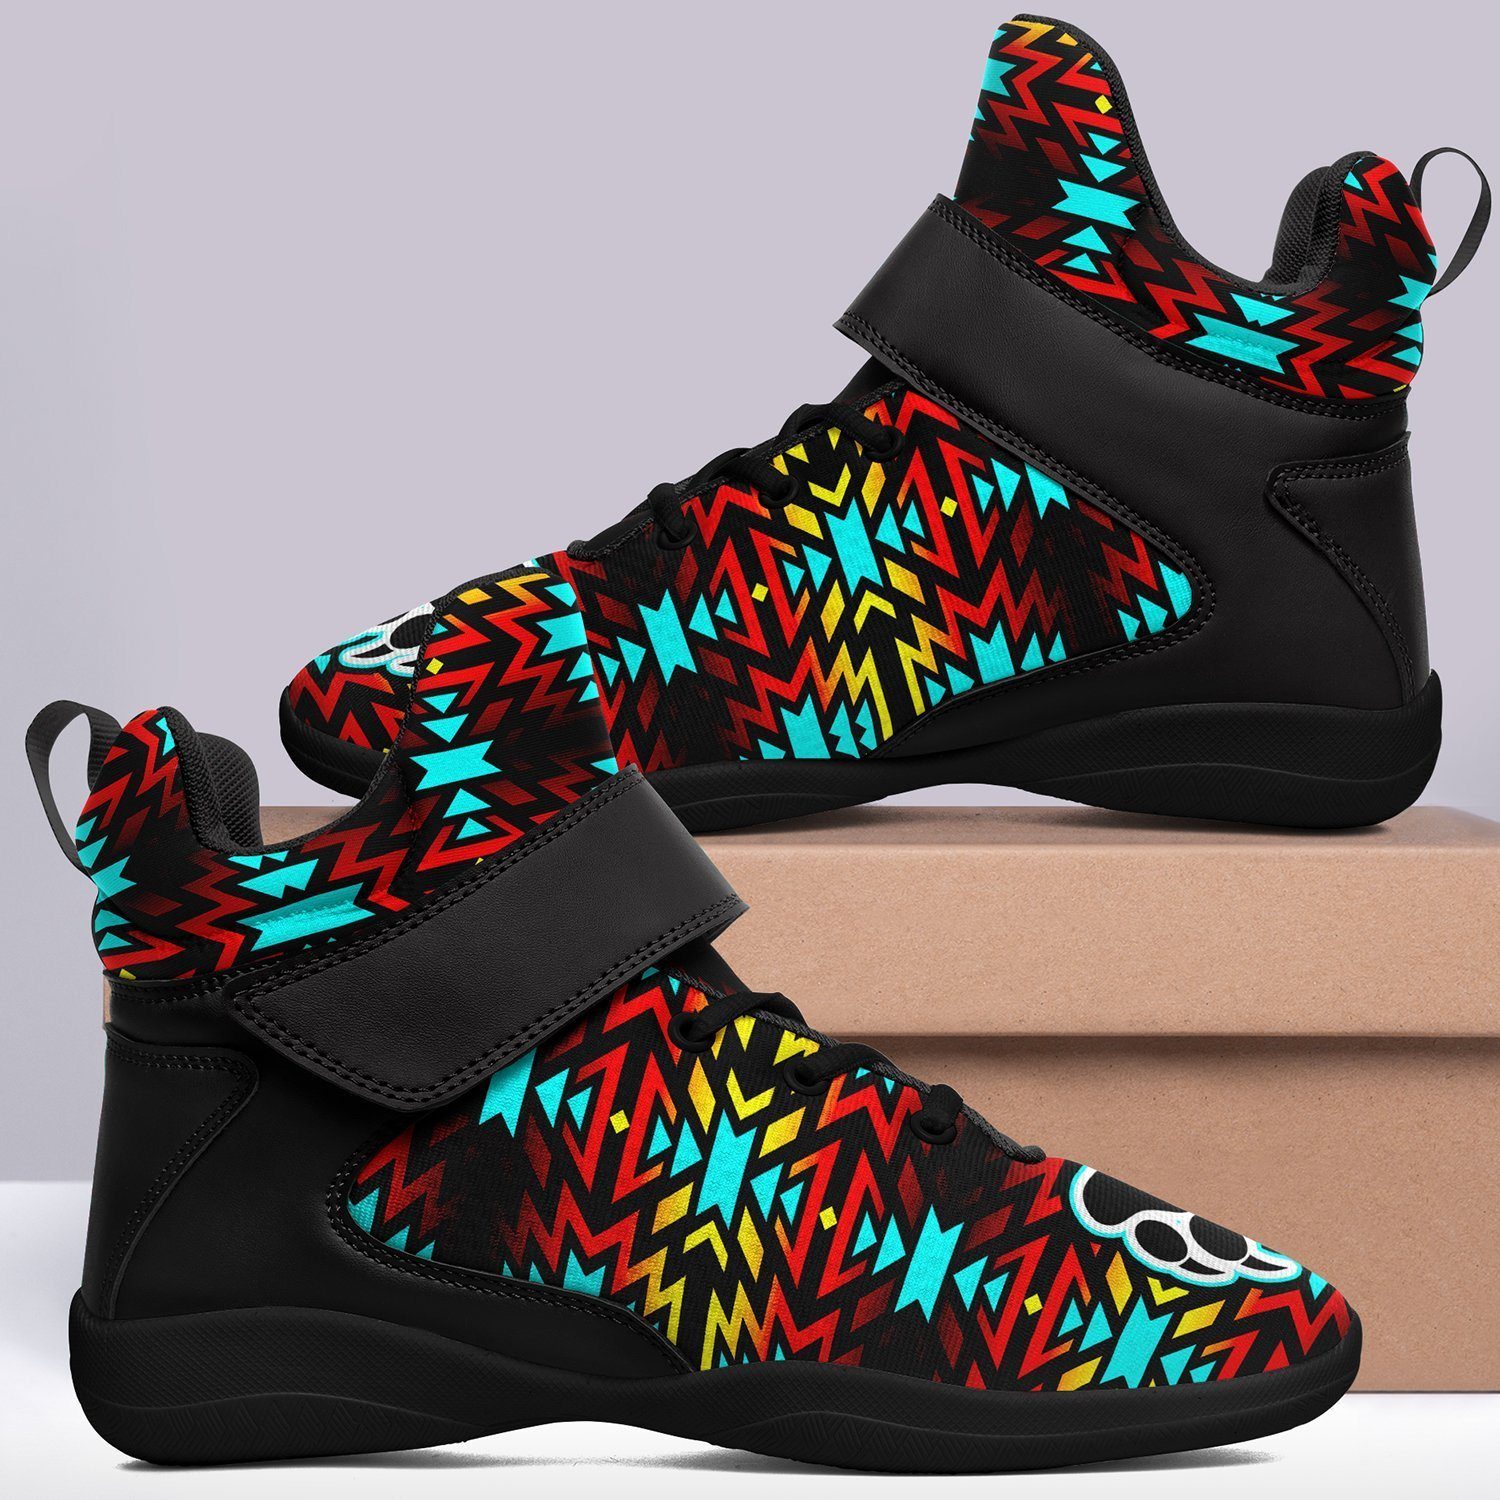 Fire Colors and Turquoise Bearpaw Kid's Ipottaa Basketball / Sport High Top Shoes 49 Dzine 